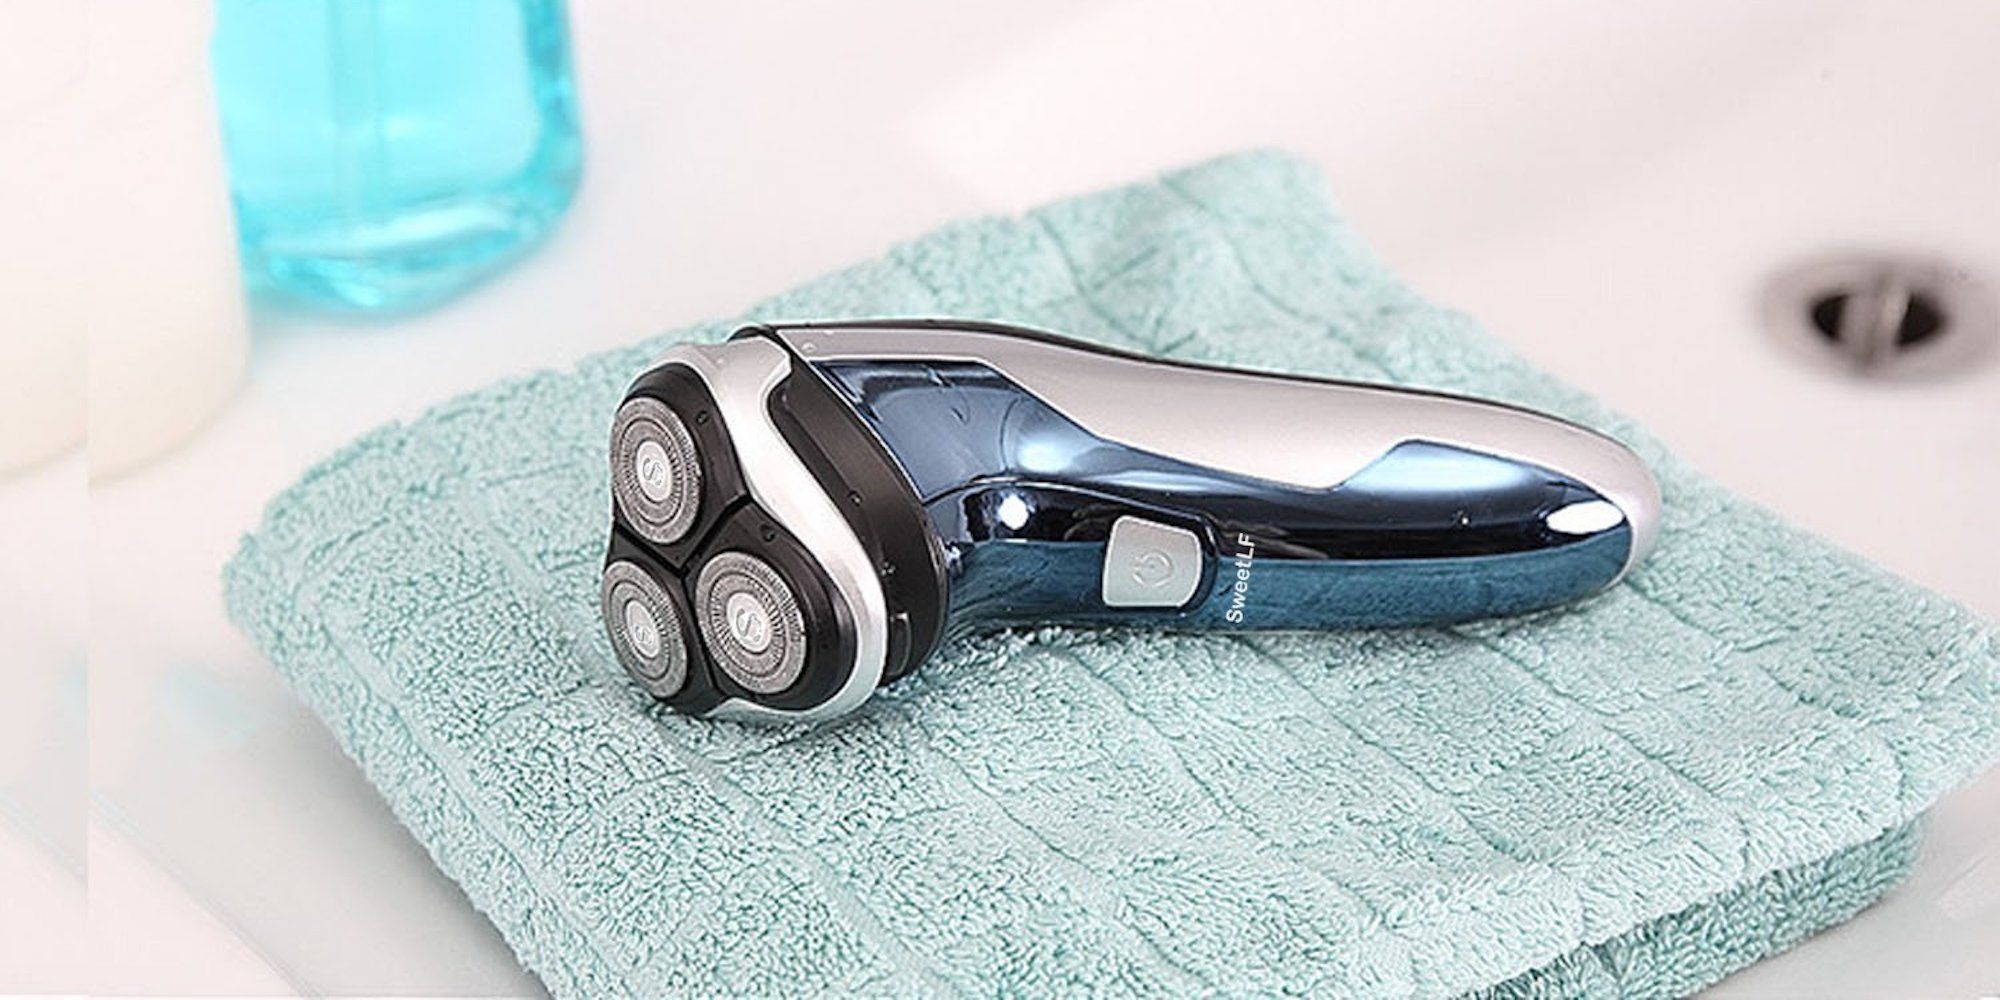 Are electric razors better for ingrown hairs?